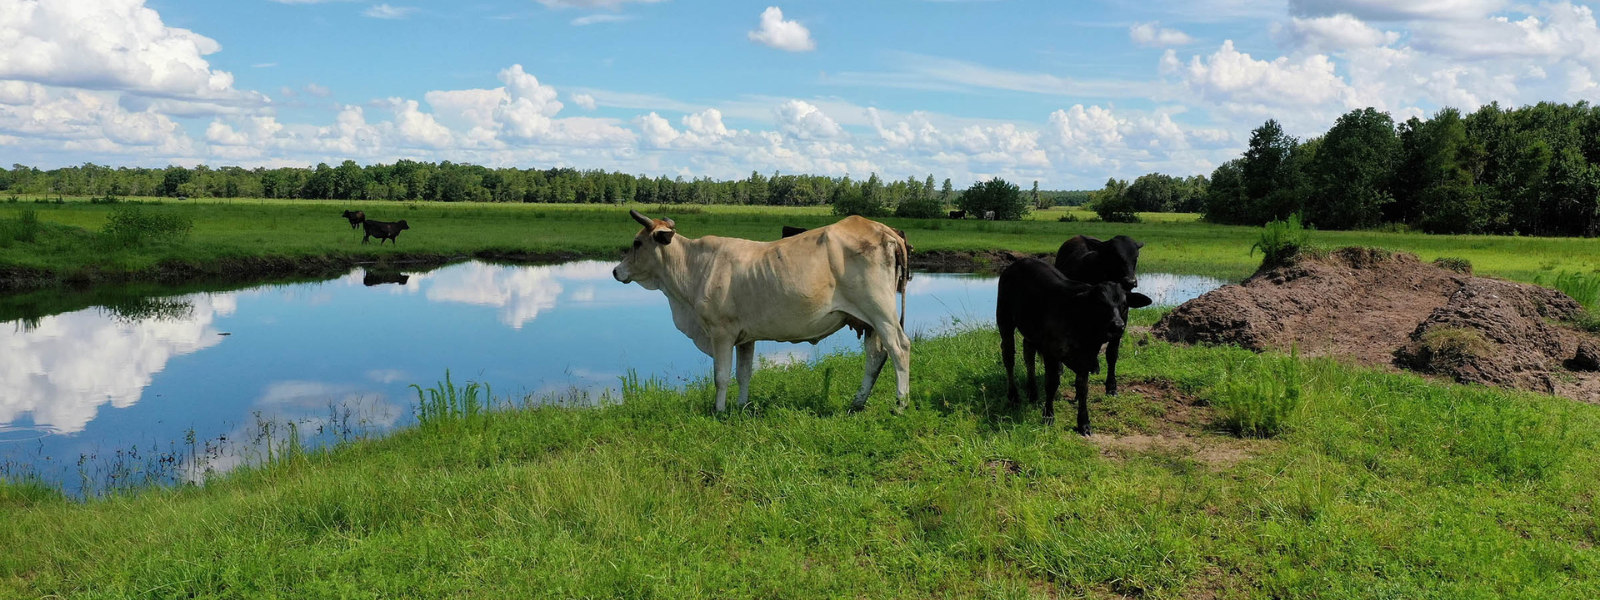 cattle on a ranch in florida